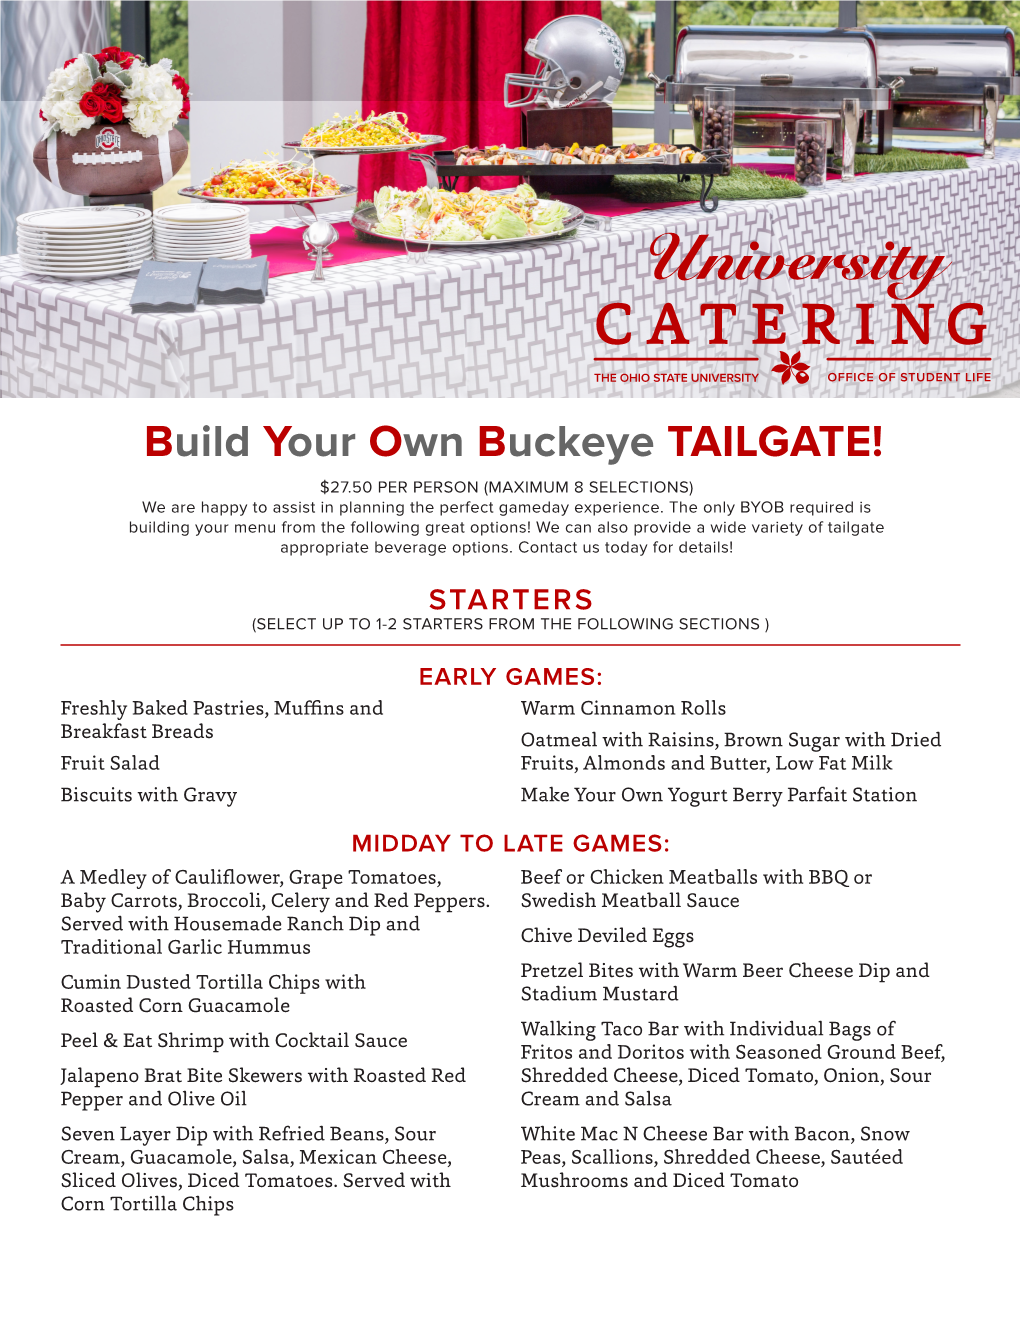 Build Your Own Buckeye TAILGATE!